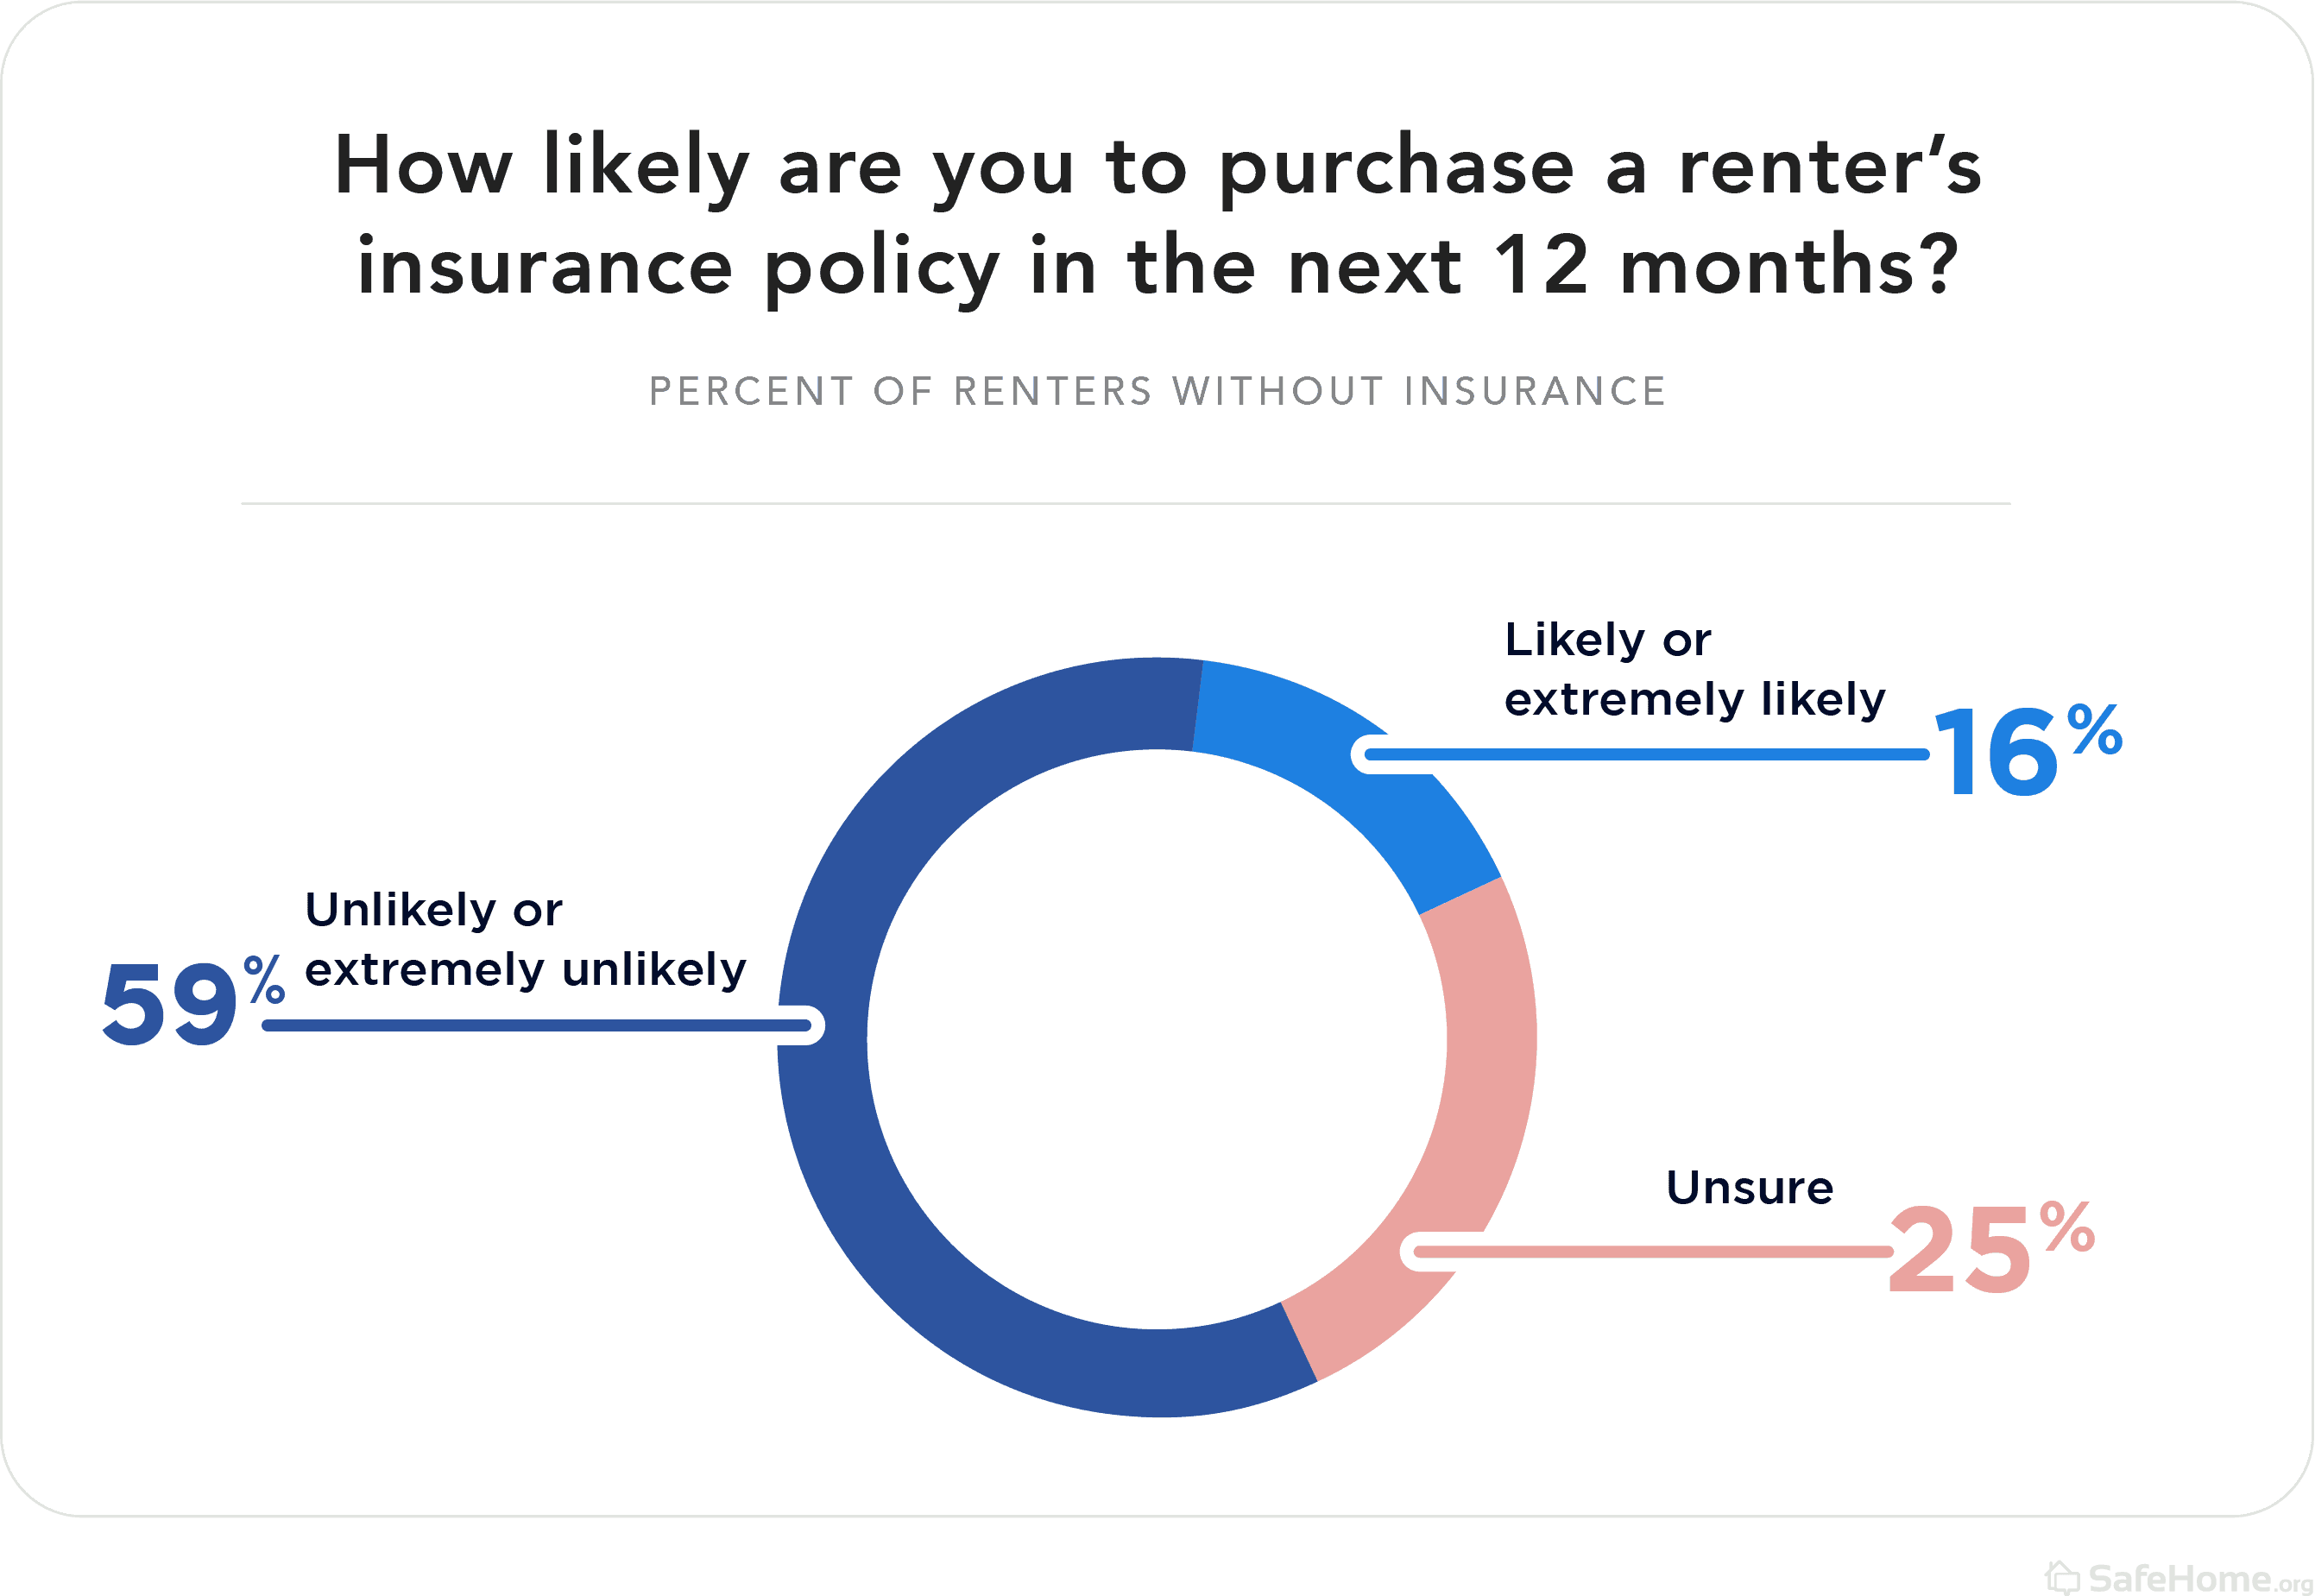 How likely are you to purchase a renters insurance policy in the next 12 months